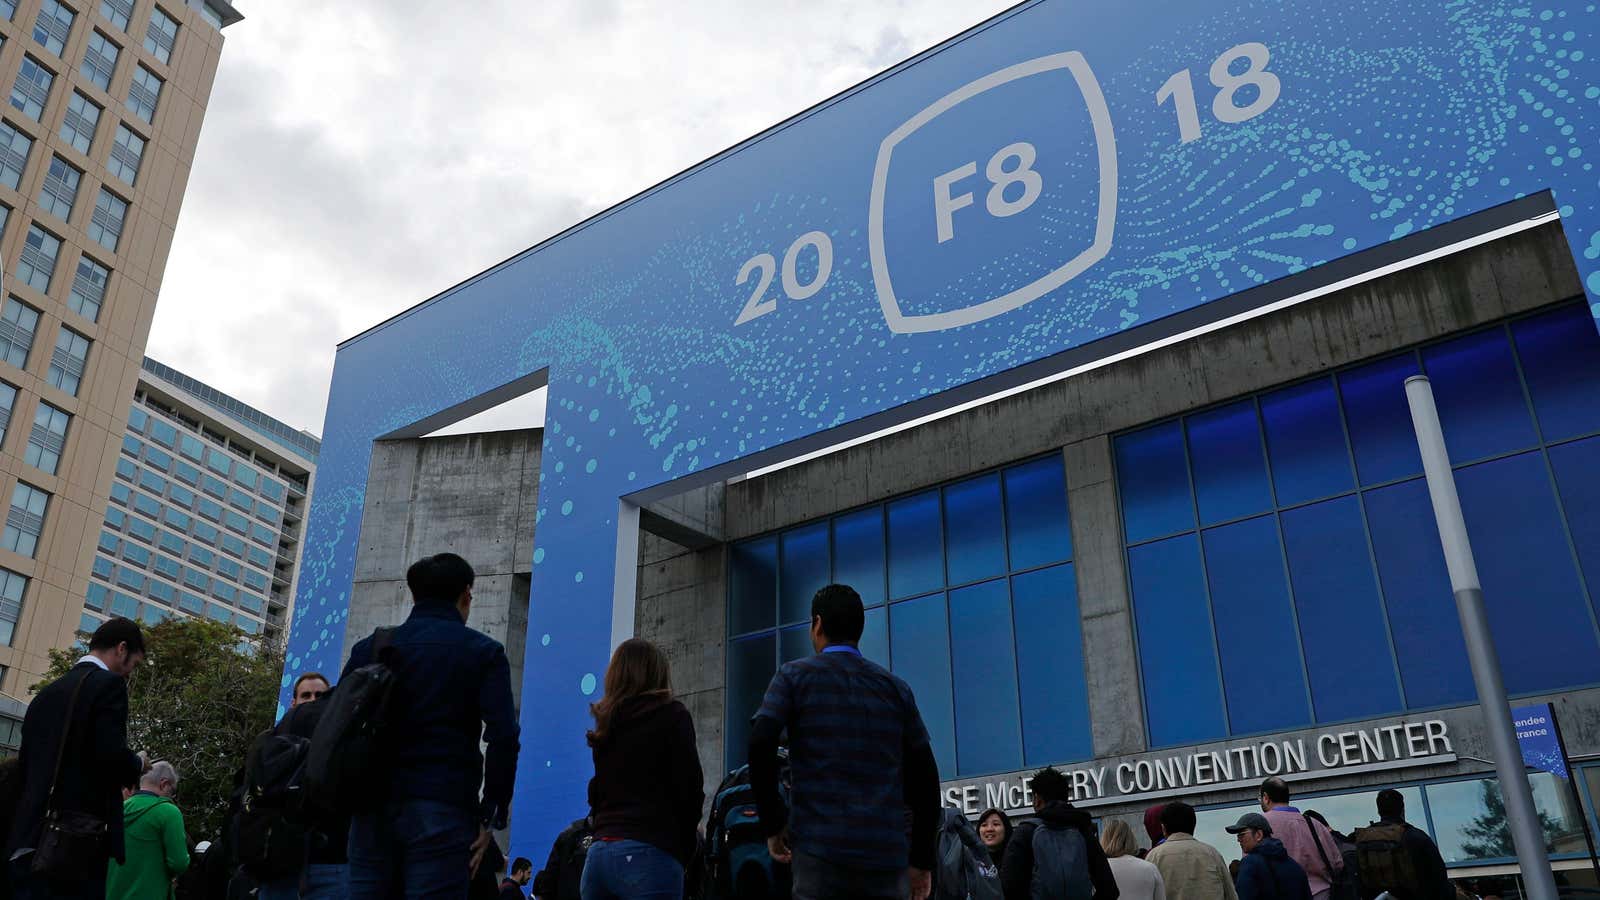 Facebook announced the anti-bias tool at F8, its annual developer’s conference.